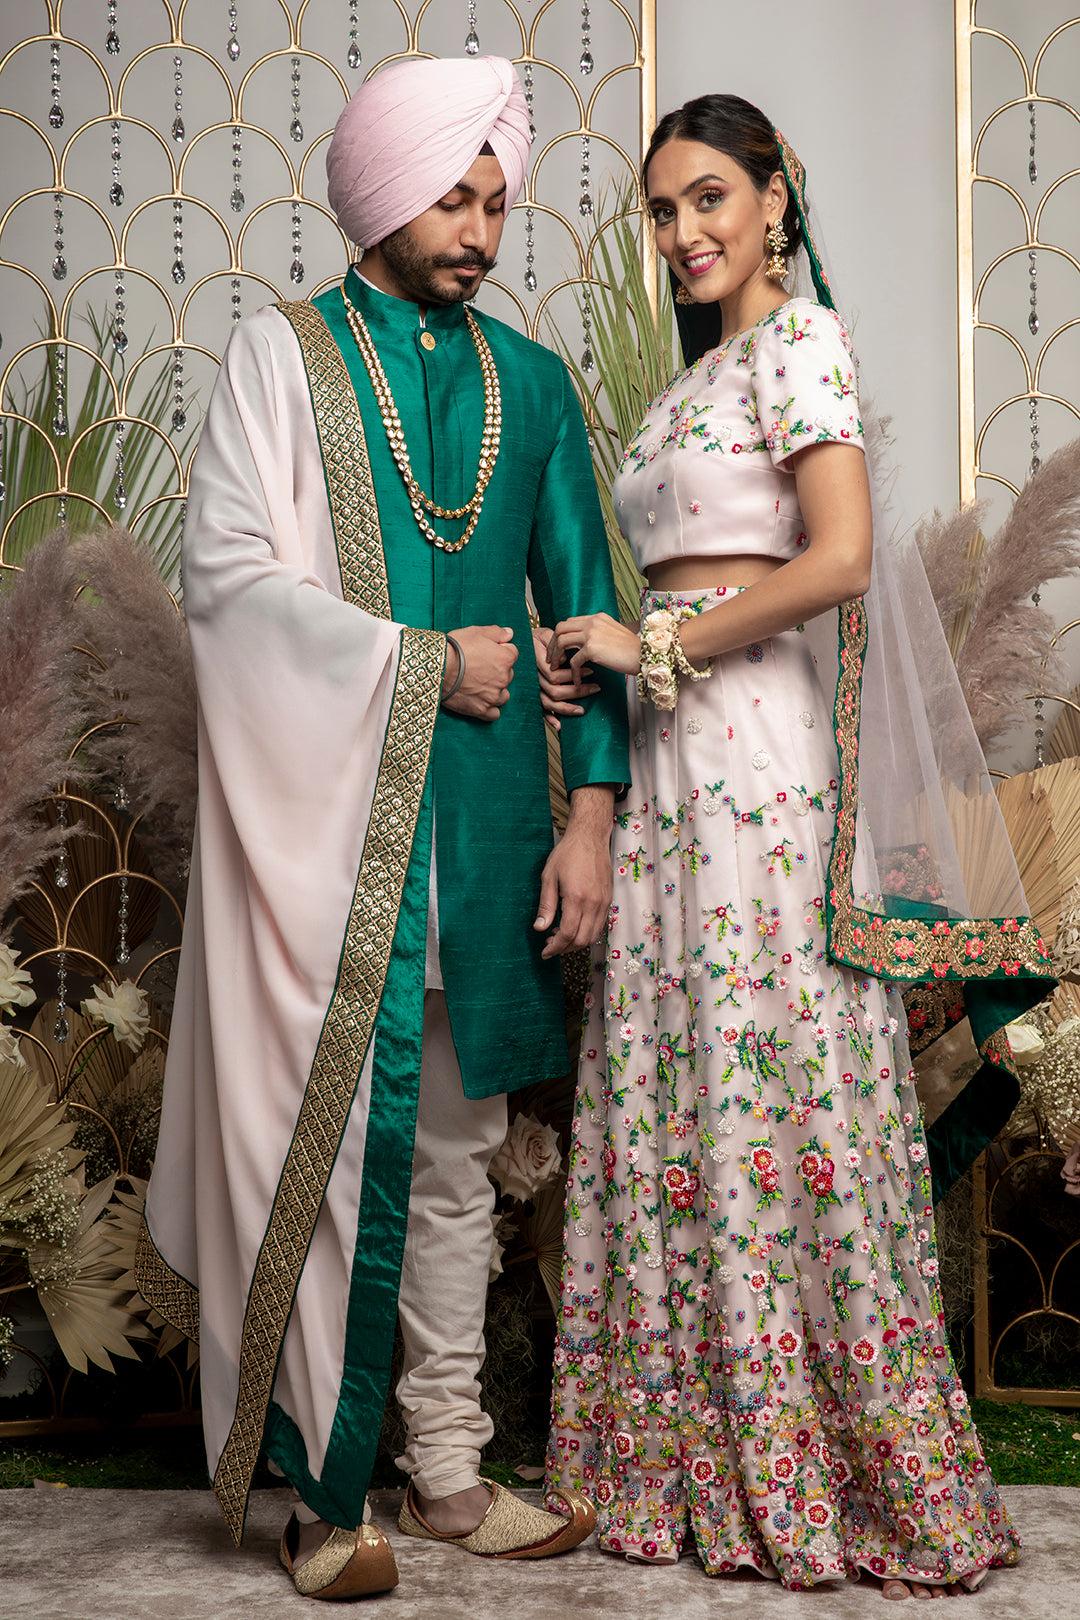 front view of a man wearing the ARUN silk sherwani jacket in evergreen with one gold button and wearing a cream stole with gold trim and cream pajama pants. Standing next to a woman in bridal set in front of a gold and floral background